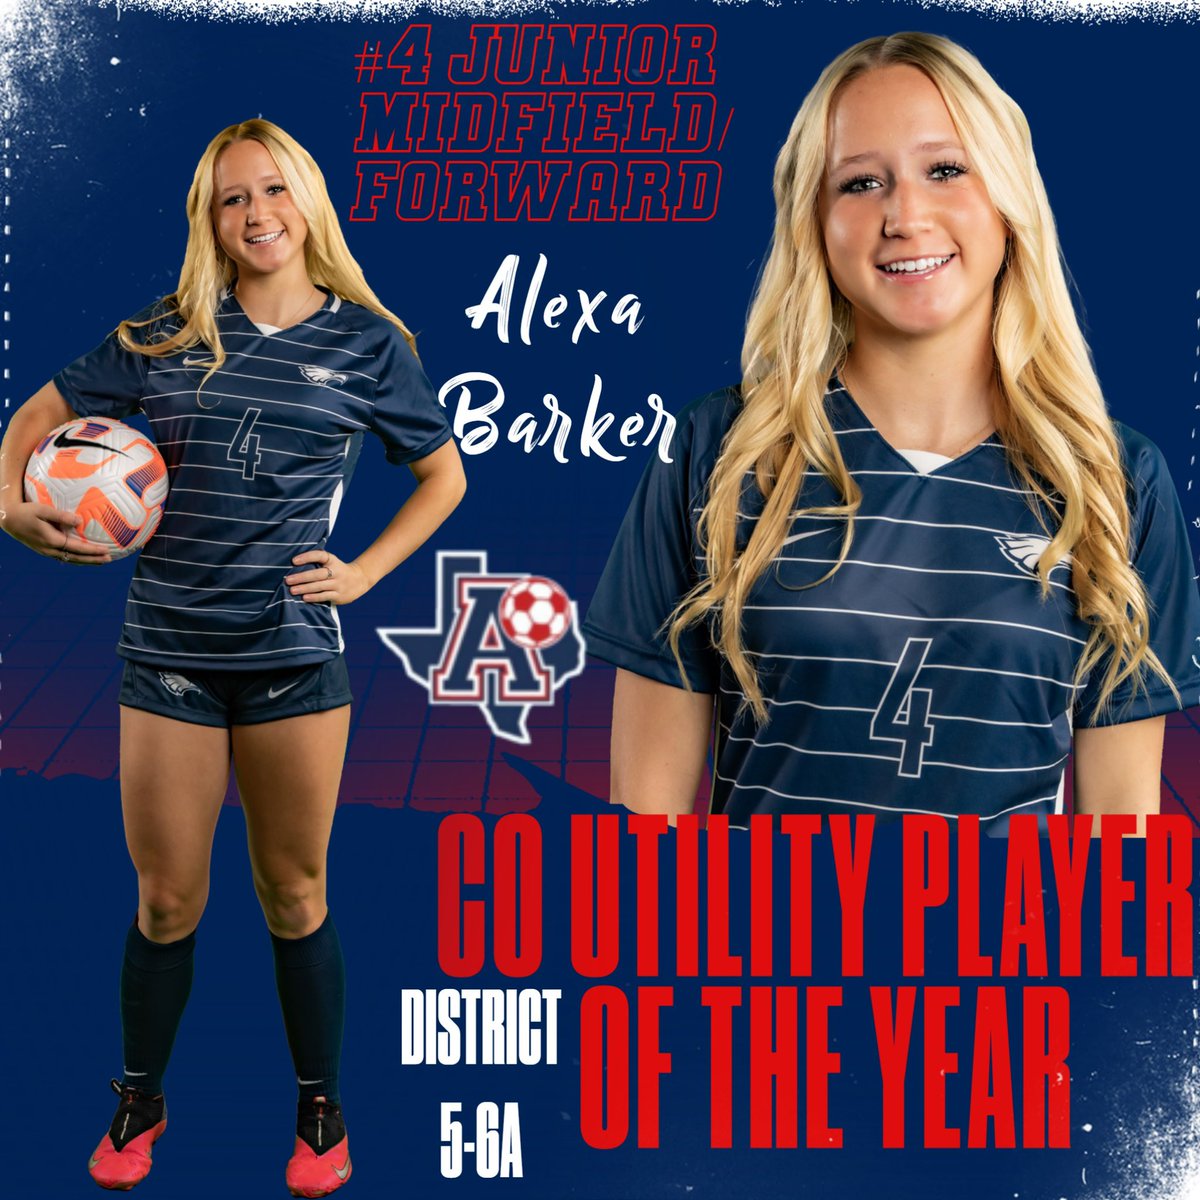 Congrats to Co-Utility Player of the Year: Jr. Alexa Barker